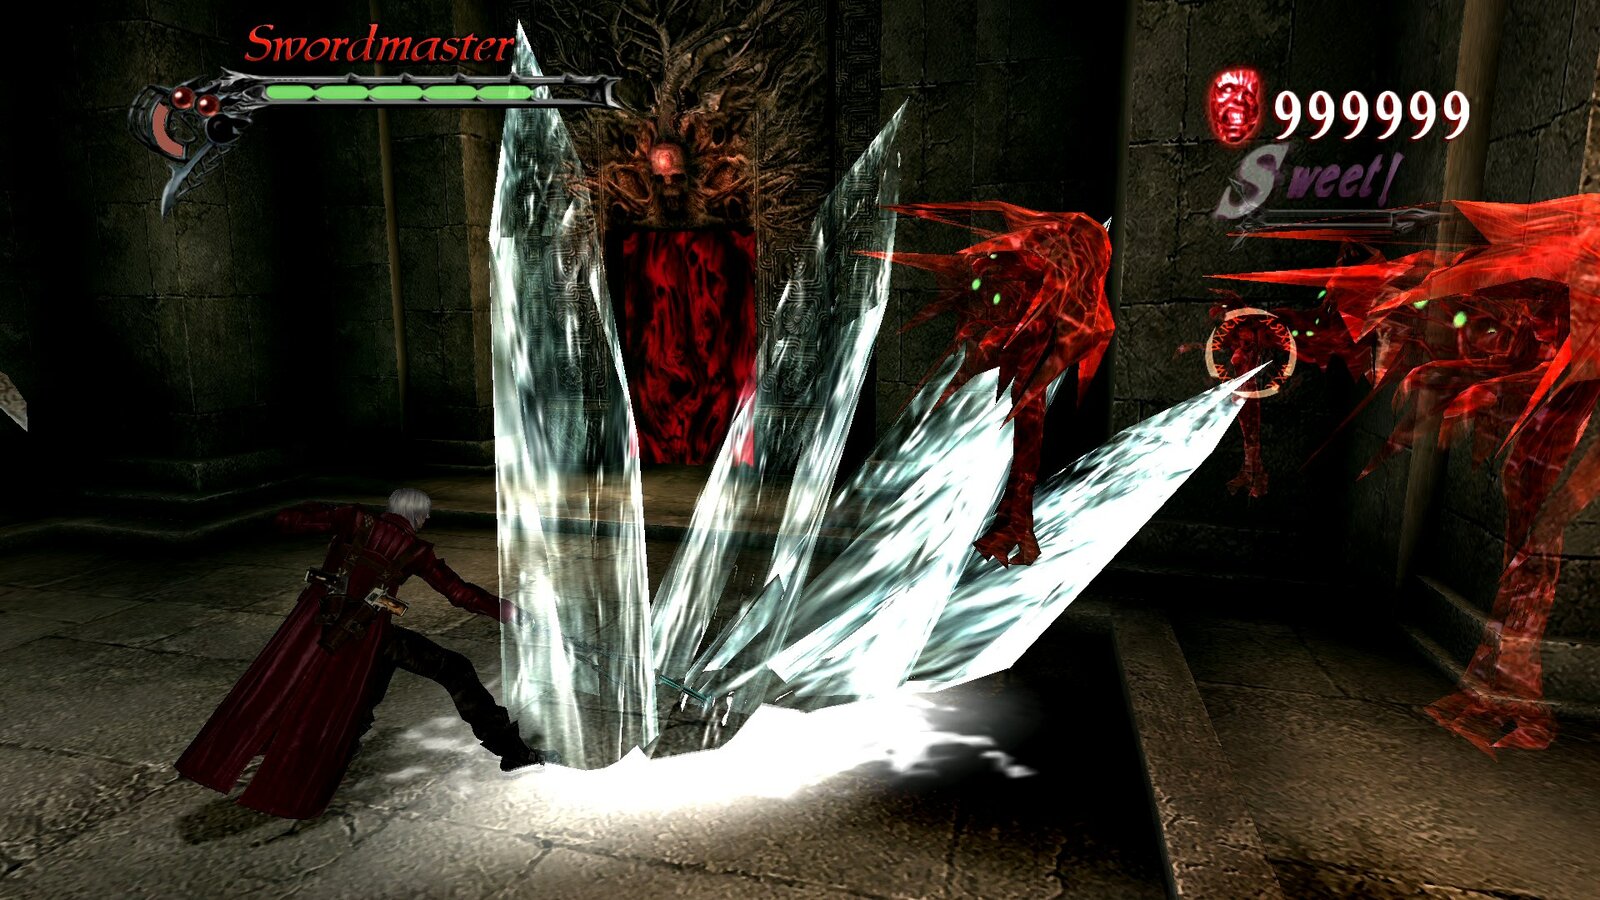 Devil May Cry 3 - Special Edition